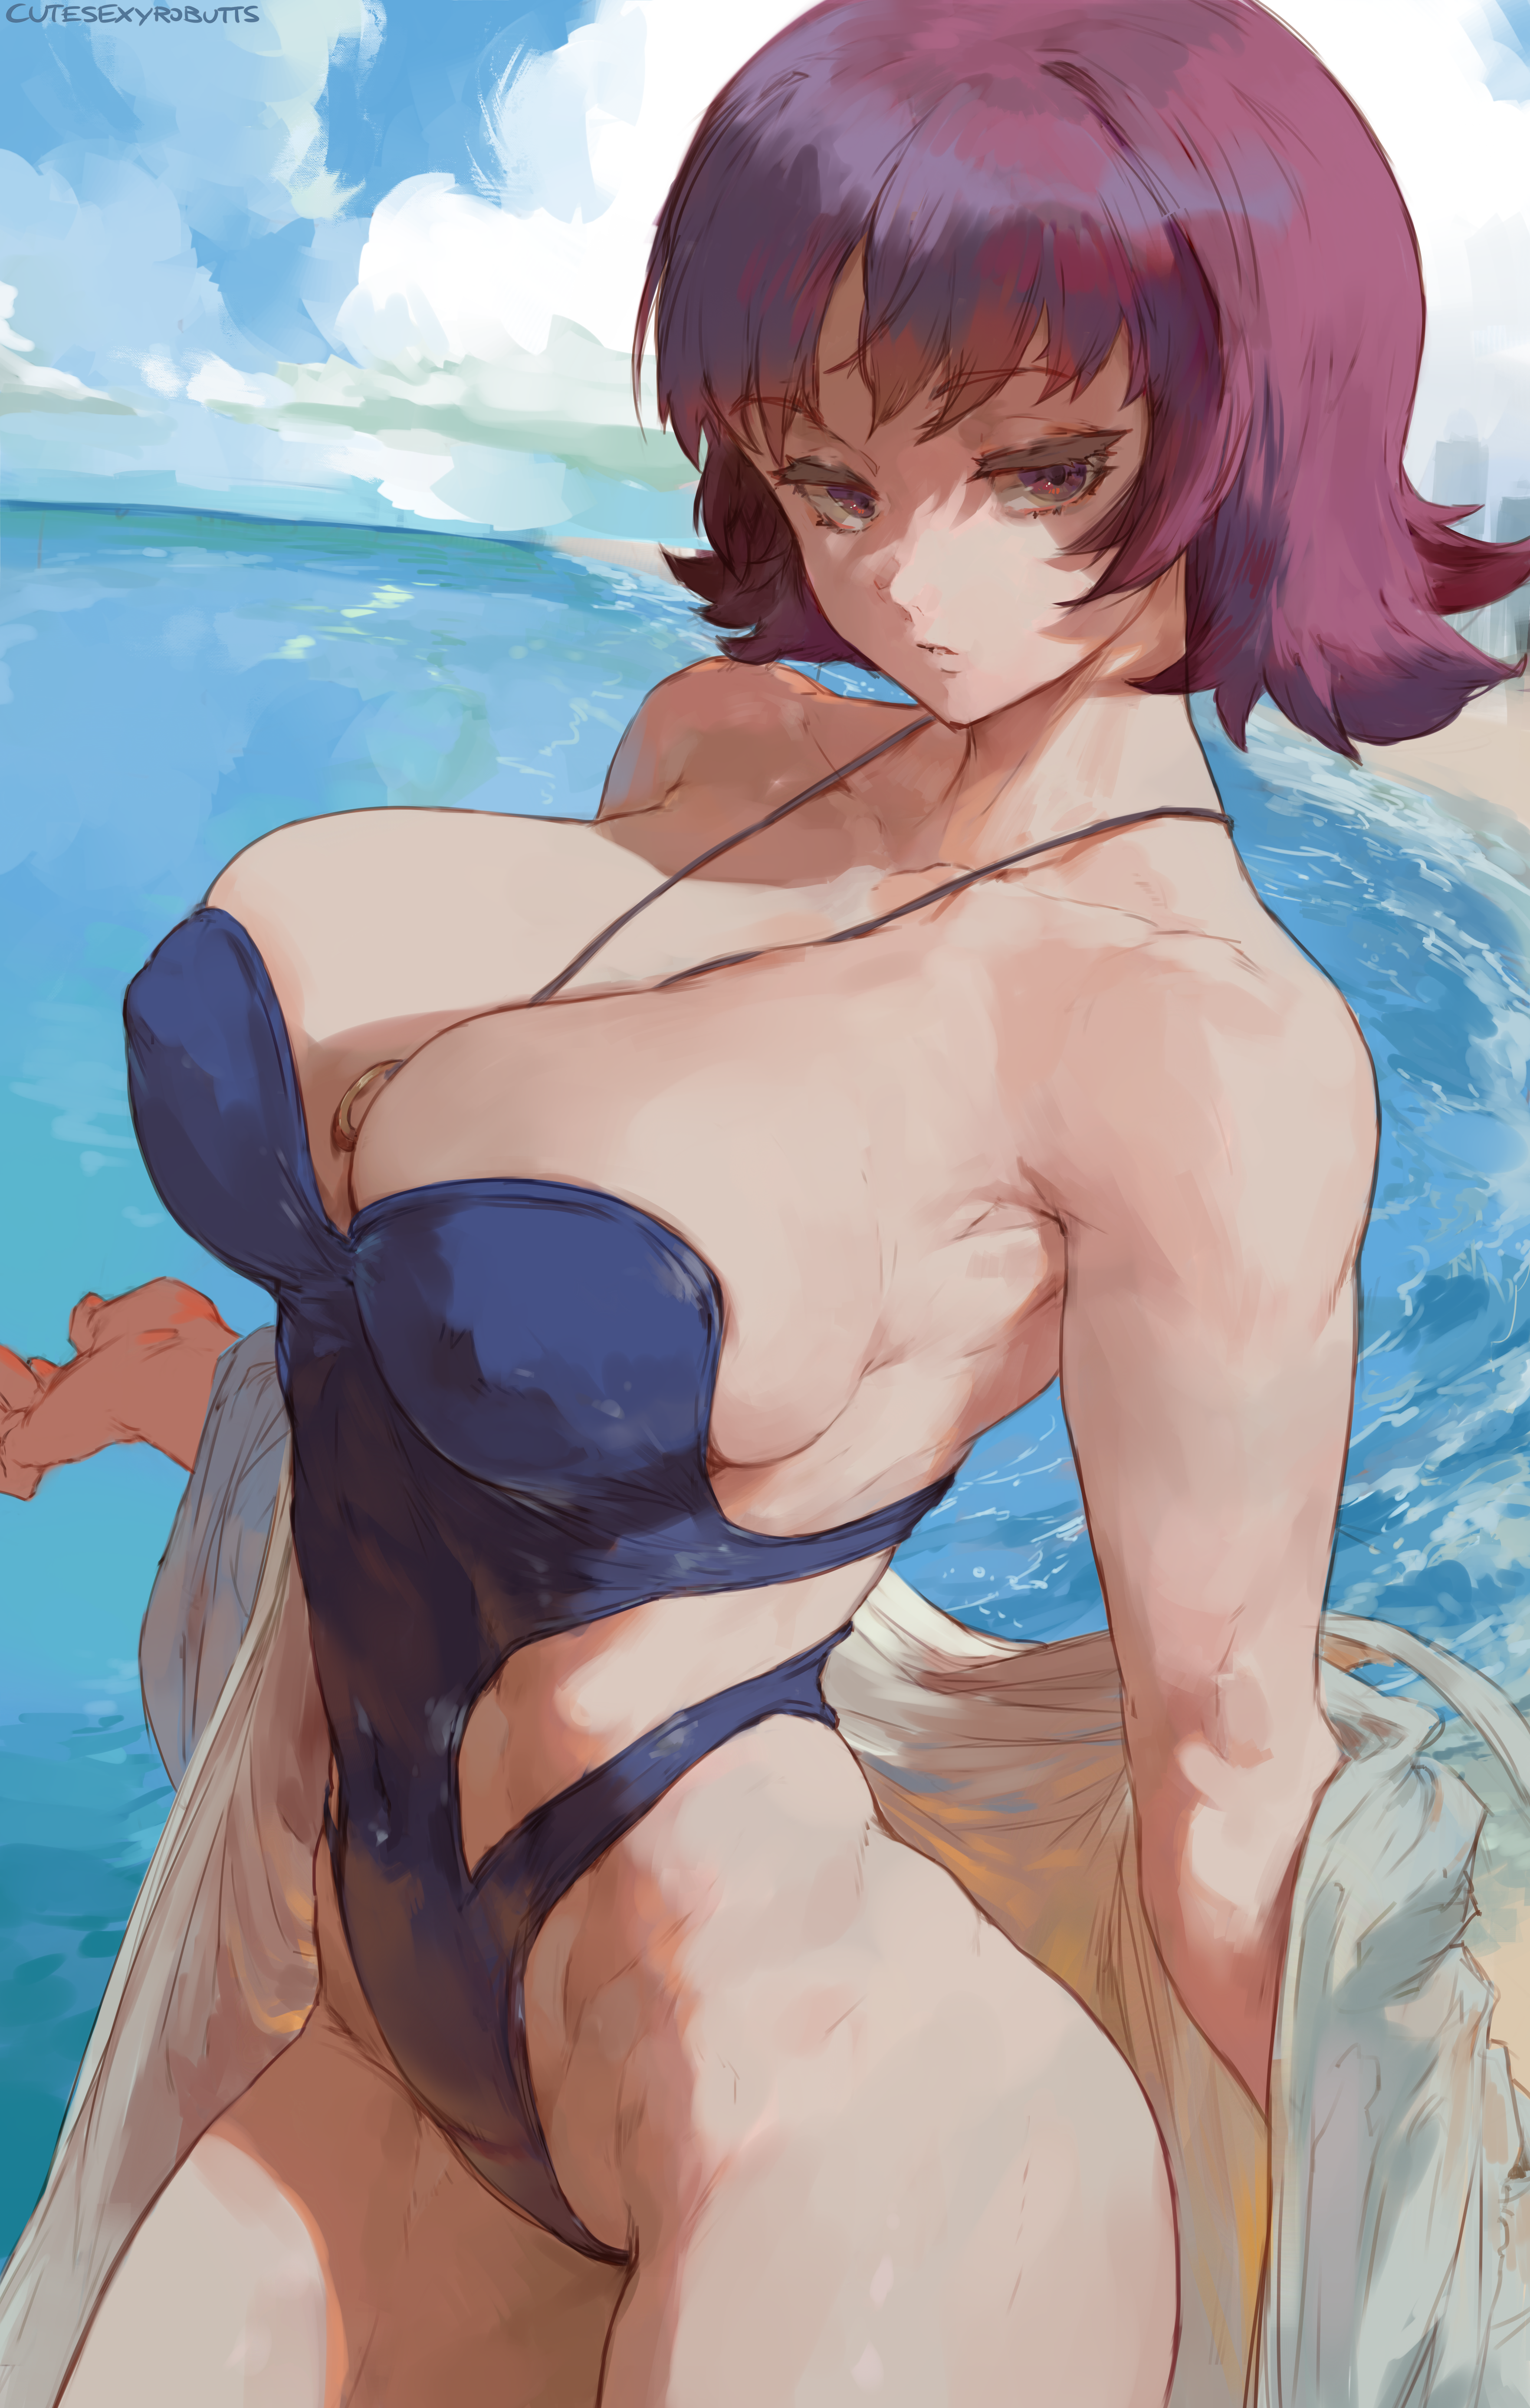 Anime 3526x5550 Professor Ivy Pokémon anime anime girls swimwear one-piece swimsuit bare shoulders big boobs huge breasts curvy sea 2D artwork drawing illustration fan art Cutesexyrobutts Nintendo looking at viewer item between boobs necklace between boobs